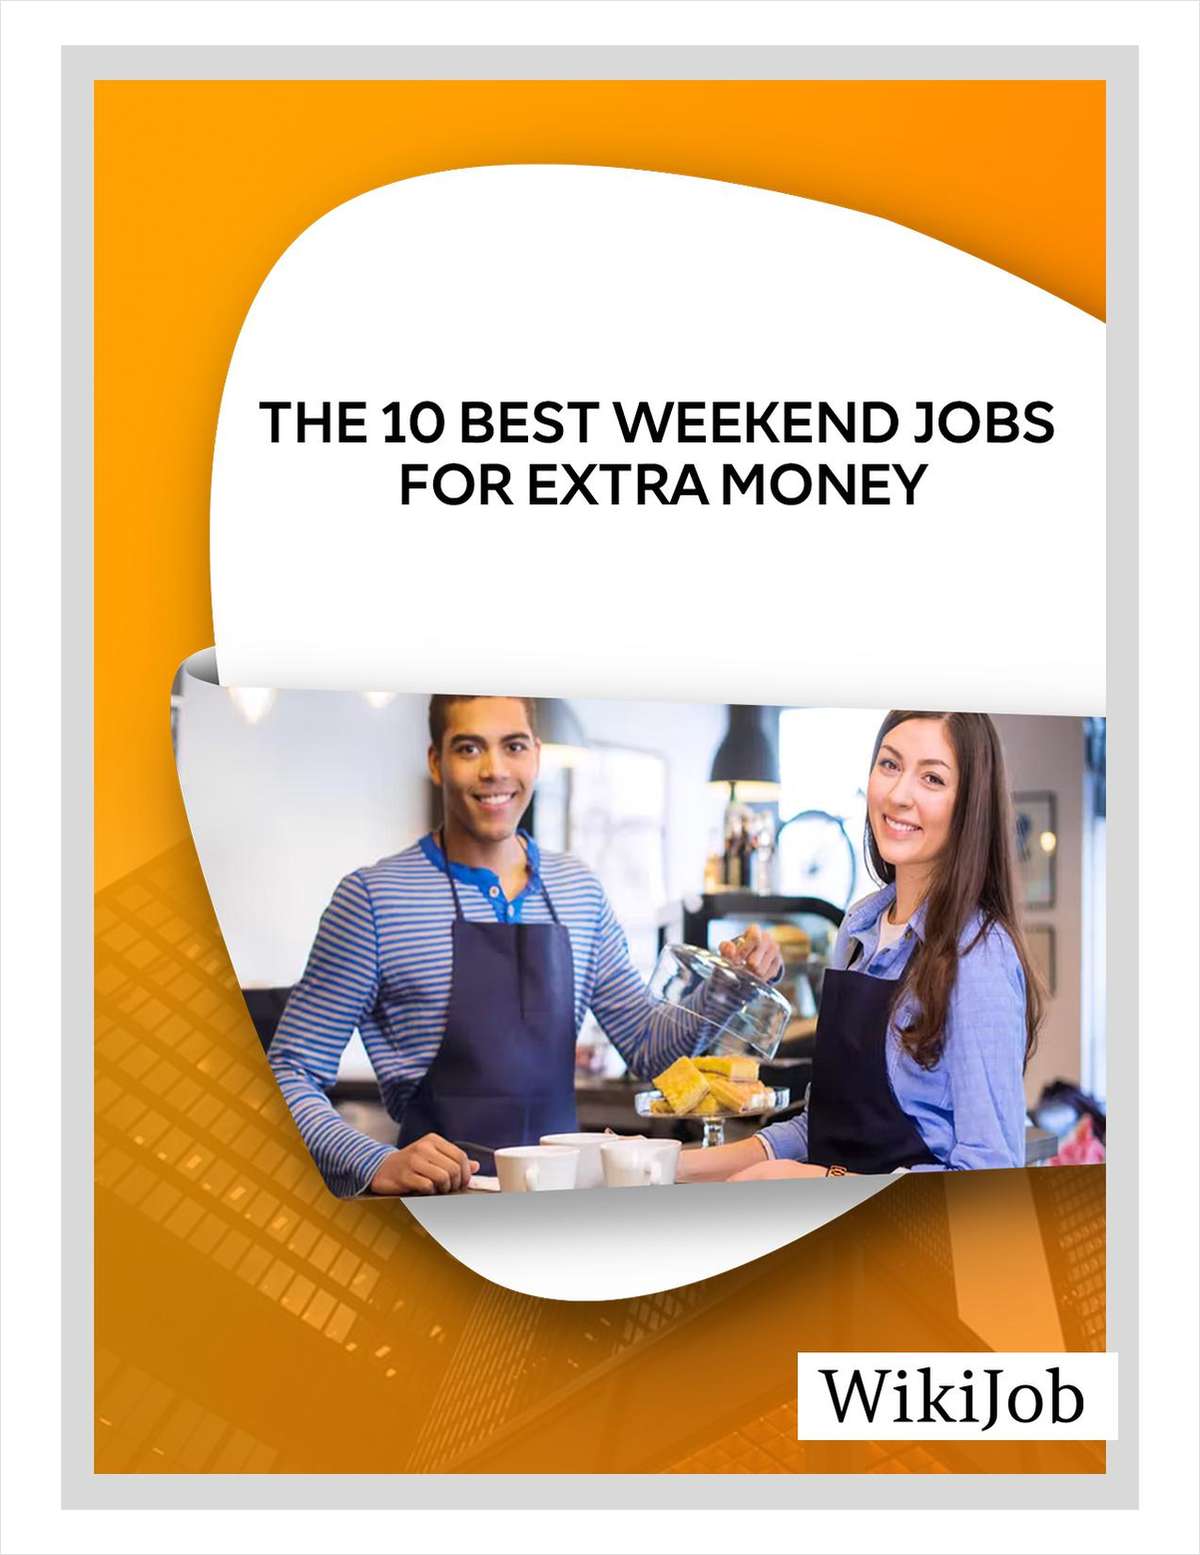 The 10 Best Weekend Jobs for Extra Money